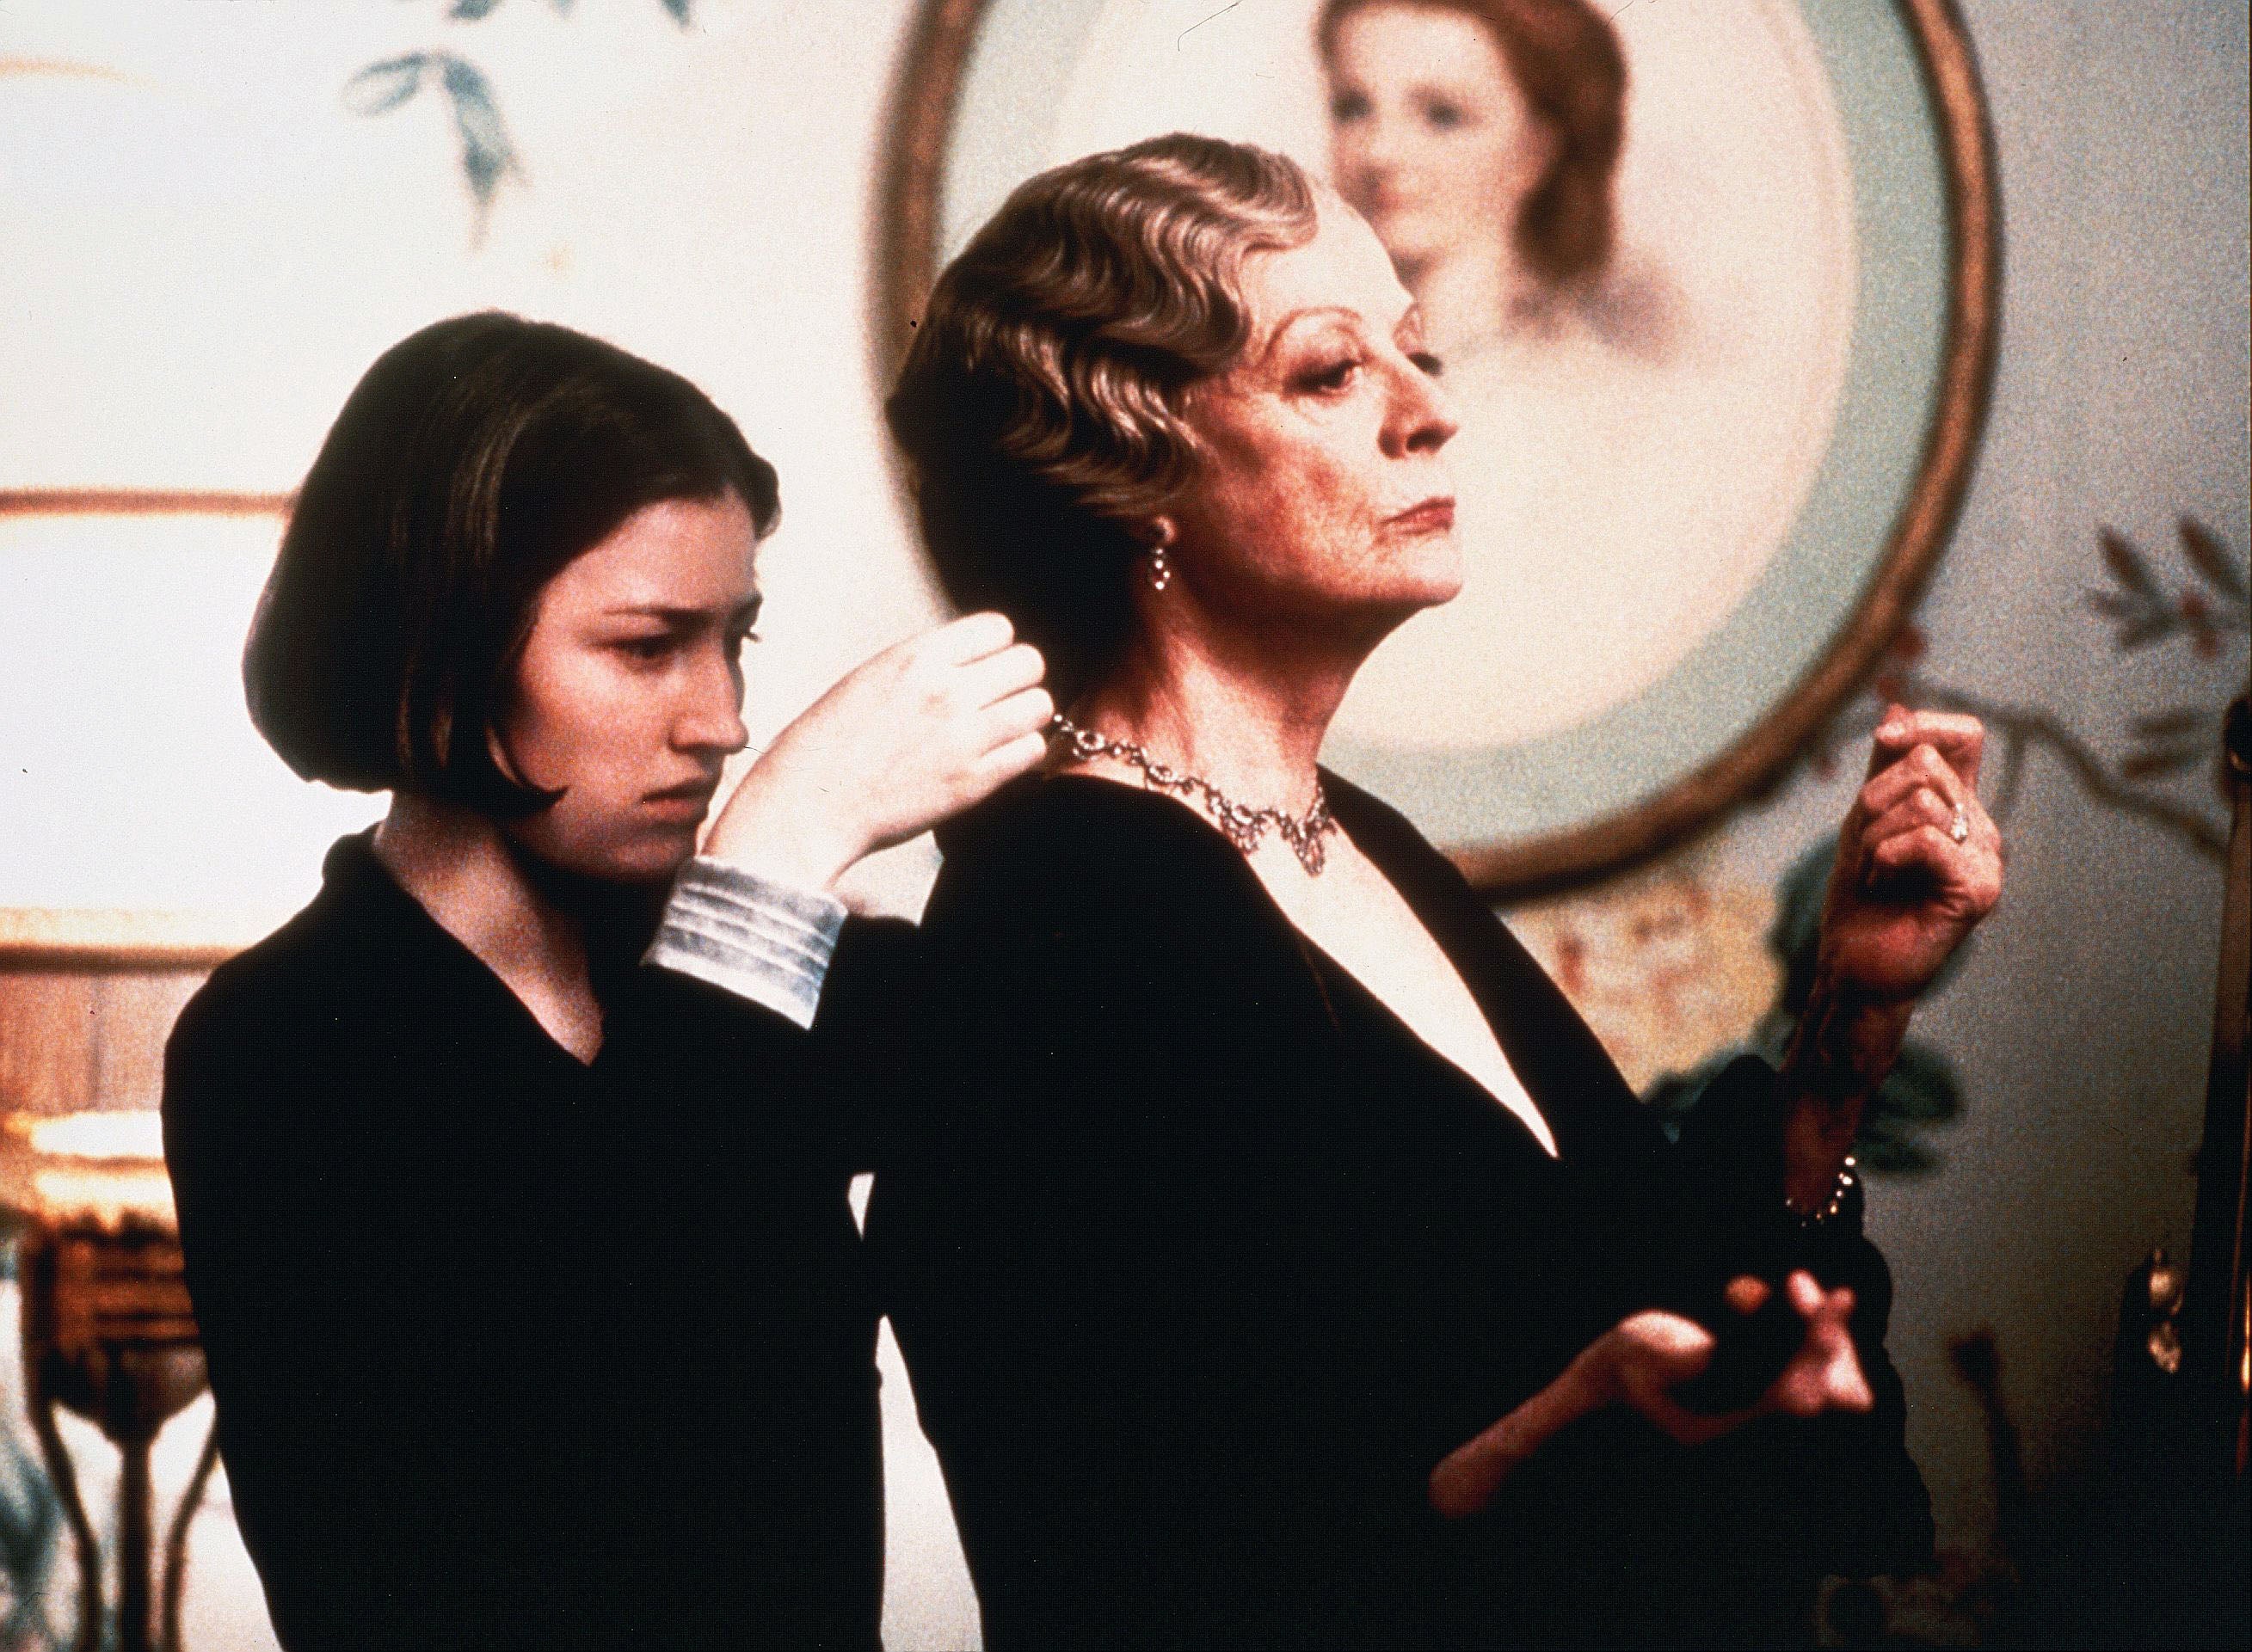 Maggie Smith as Constance, Countess of Trentham, and Kelly Macdonald as her maid in ‘Gosford Park’ in 2001